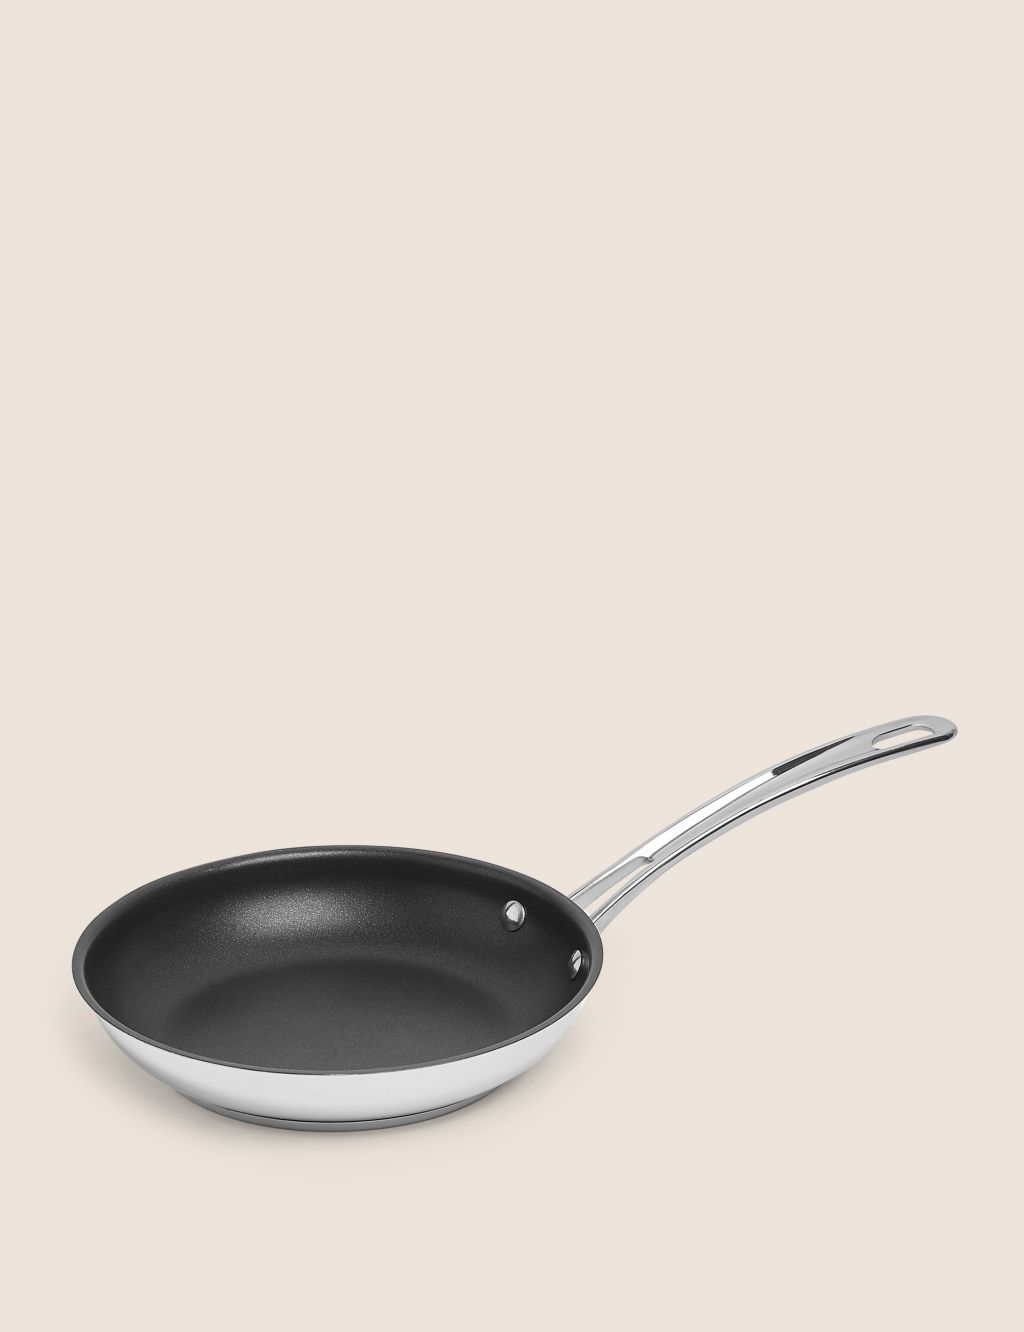 Stainless Steel 20cm Small Non-Stick Frying Pan image 1